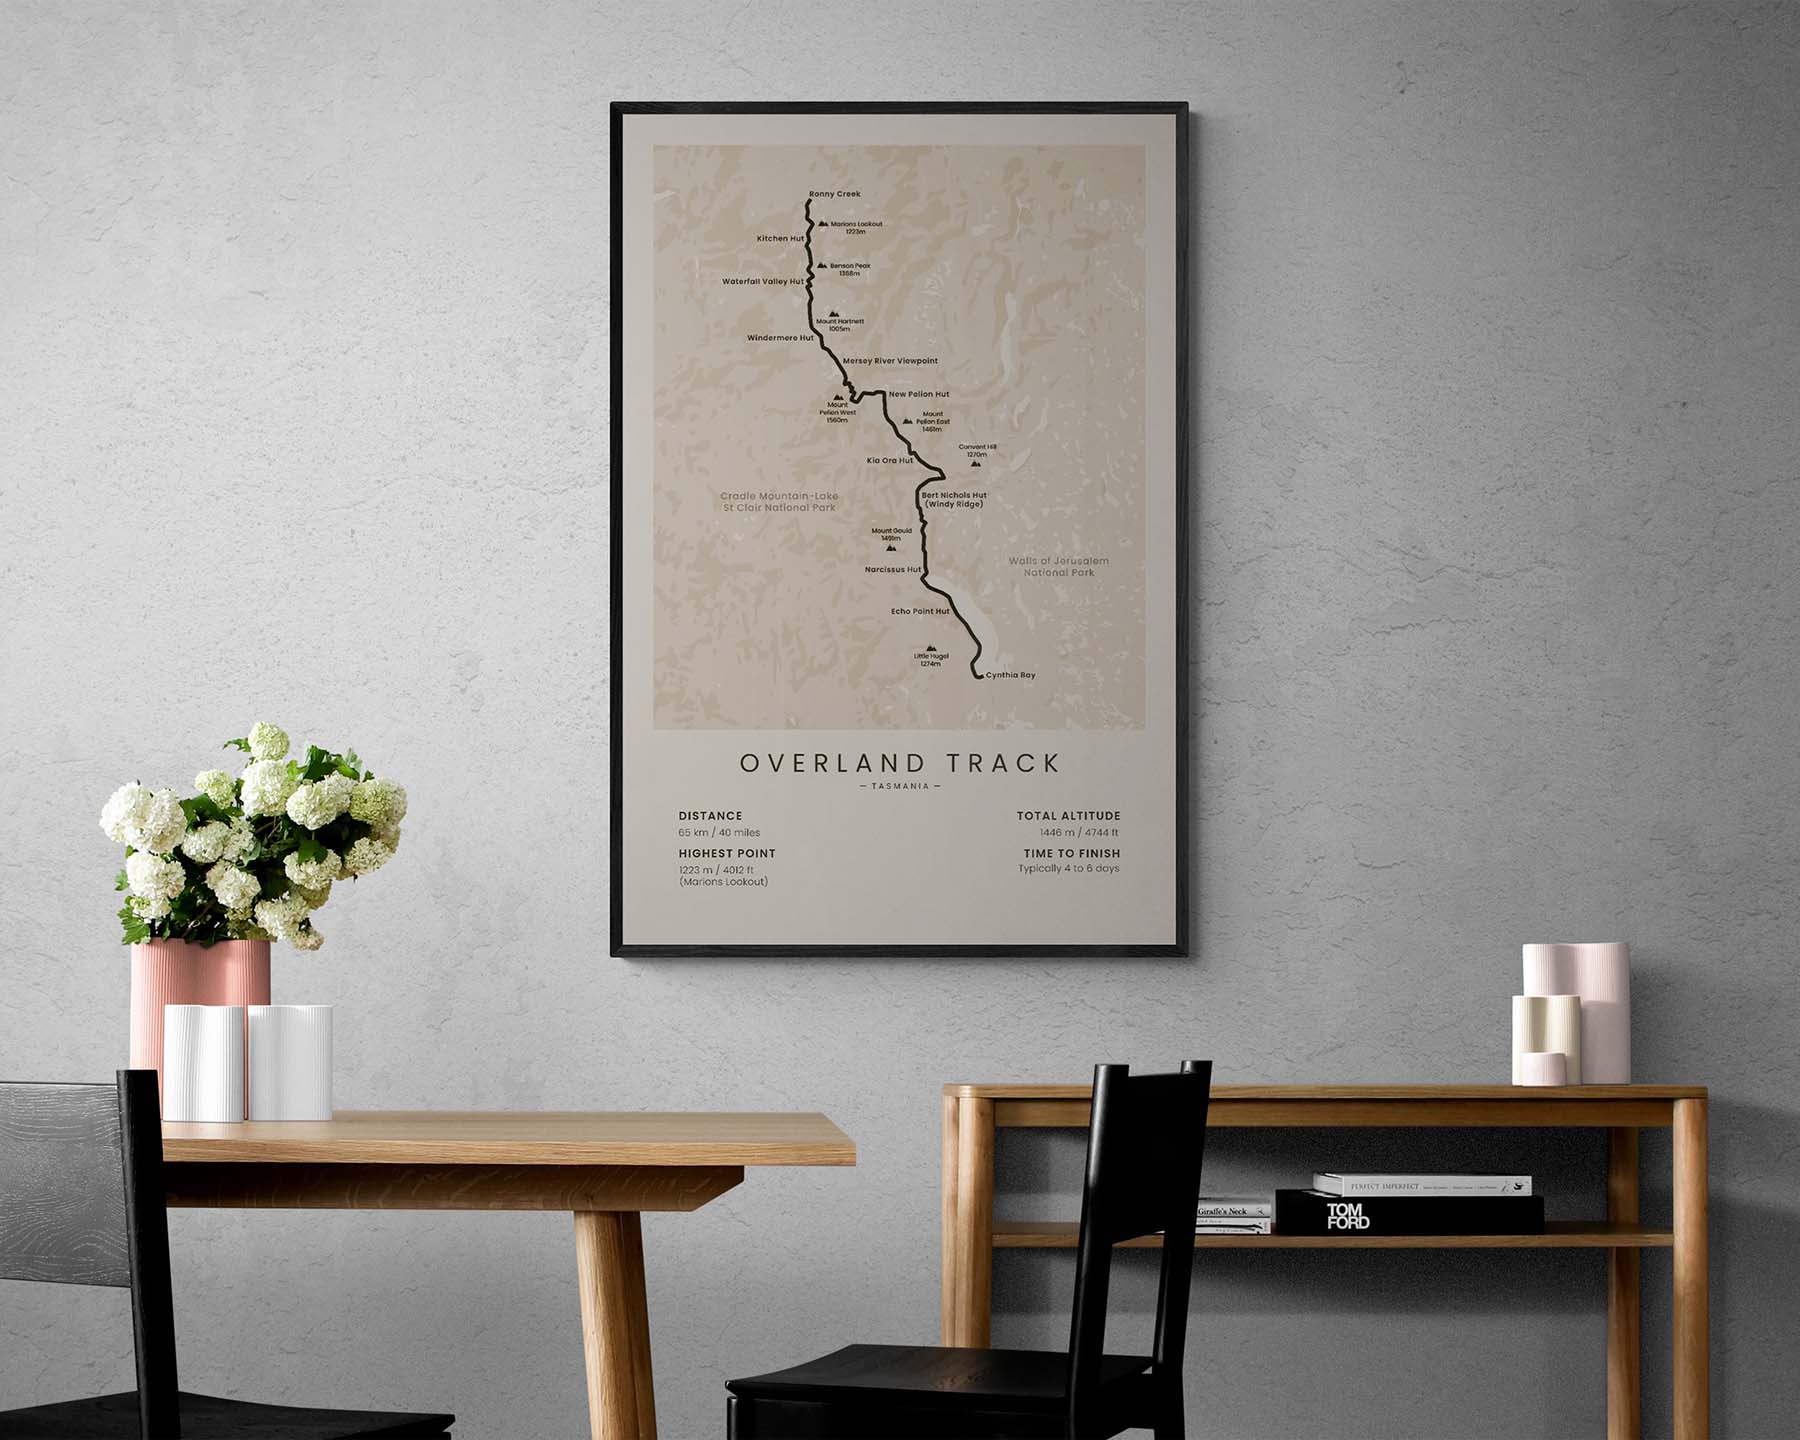 Overland Track (Cradle Mountain NP) path wall art in minimal room decor